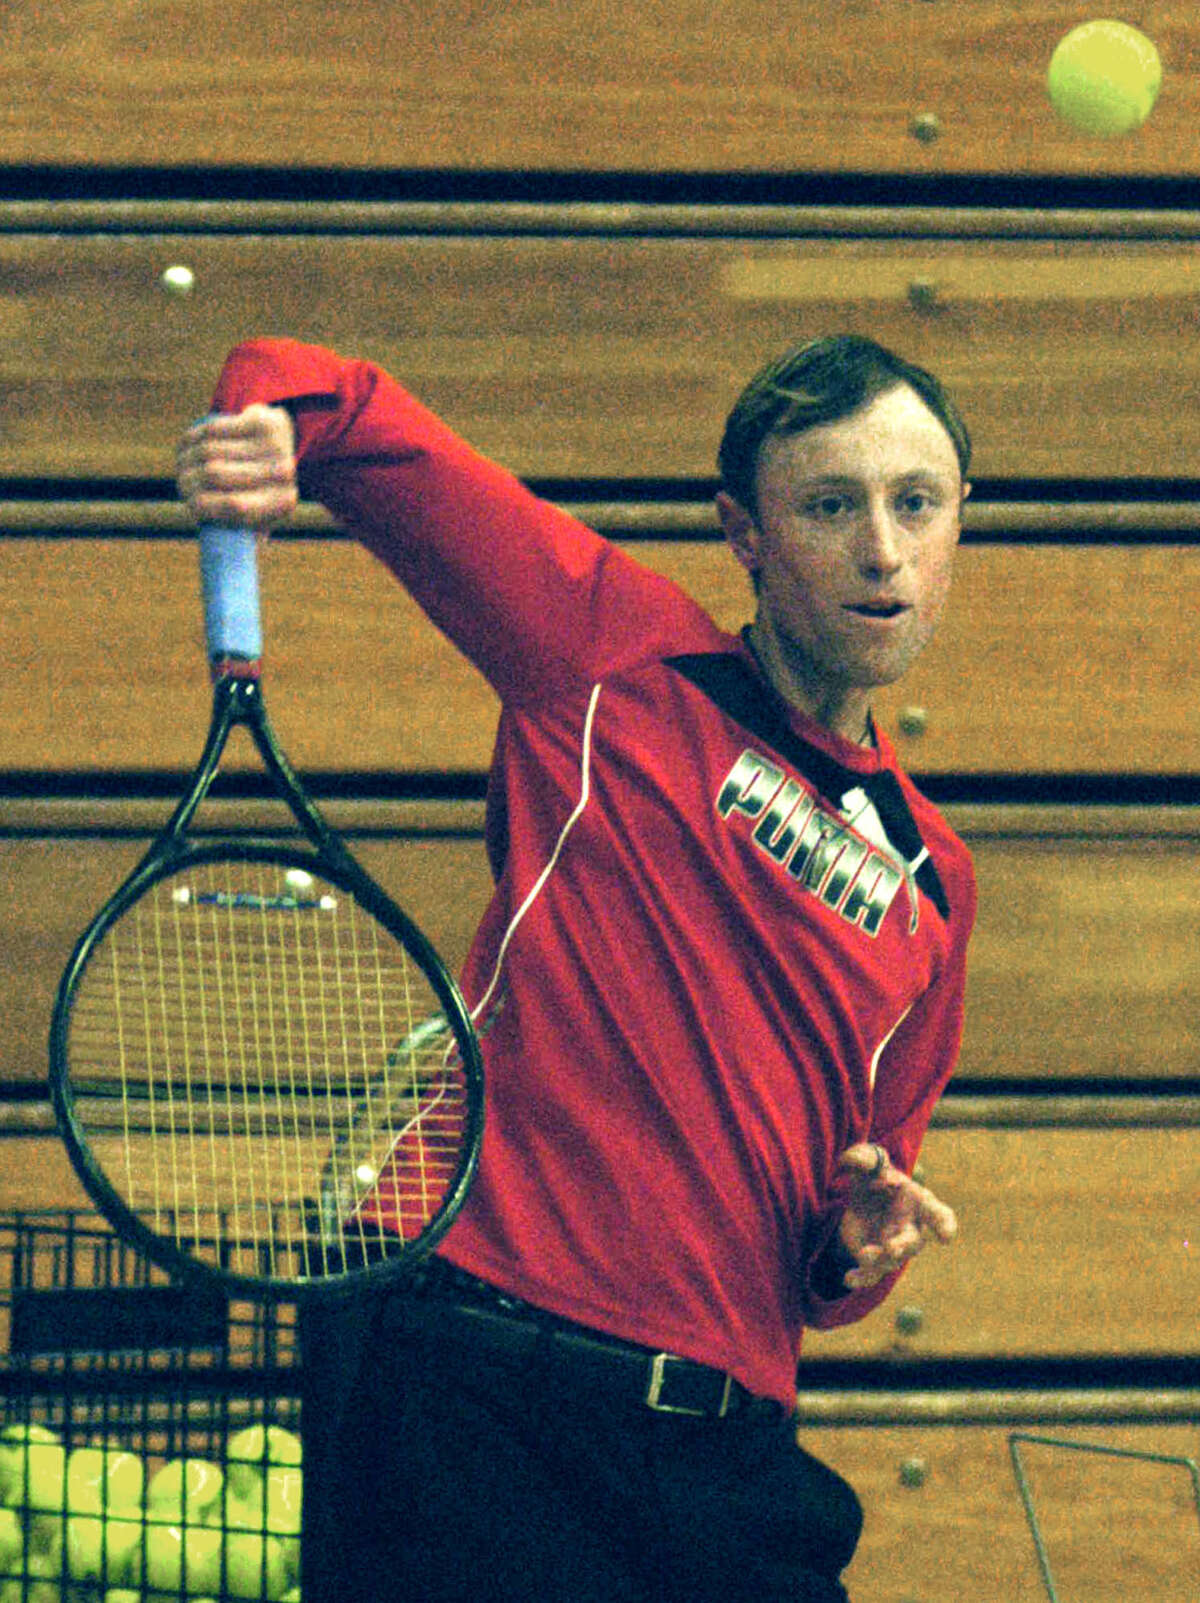 Assistant coach Stephen Riley demonstrates his racquet skills during pre-season practice for Shepaug Valley High School boys' tennis. April 2013